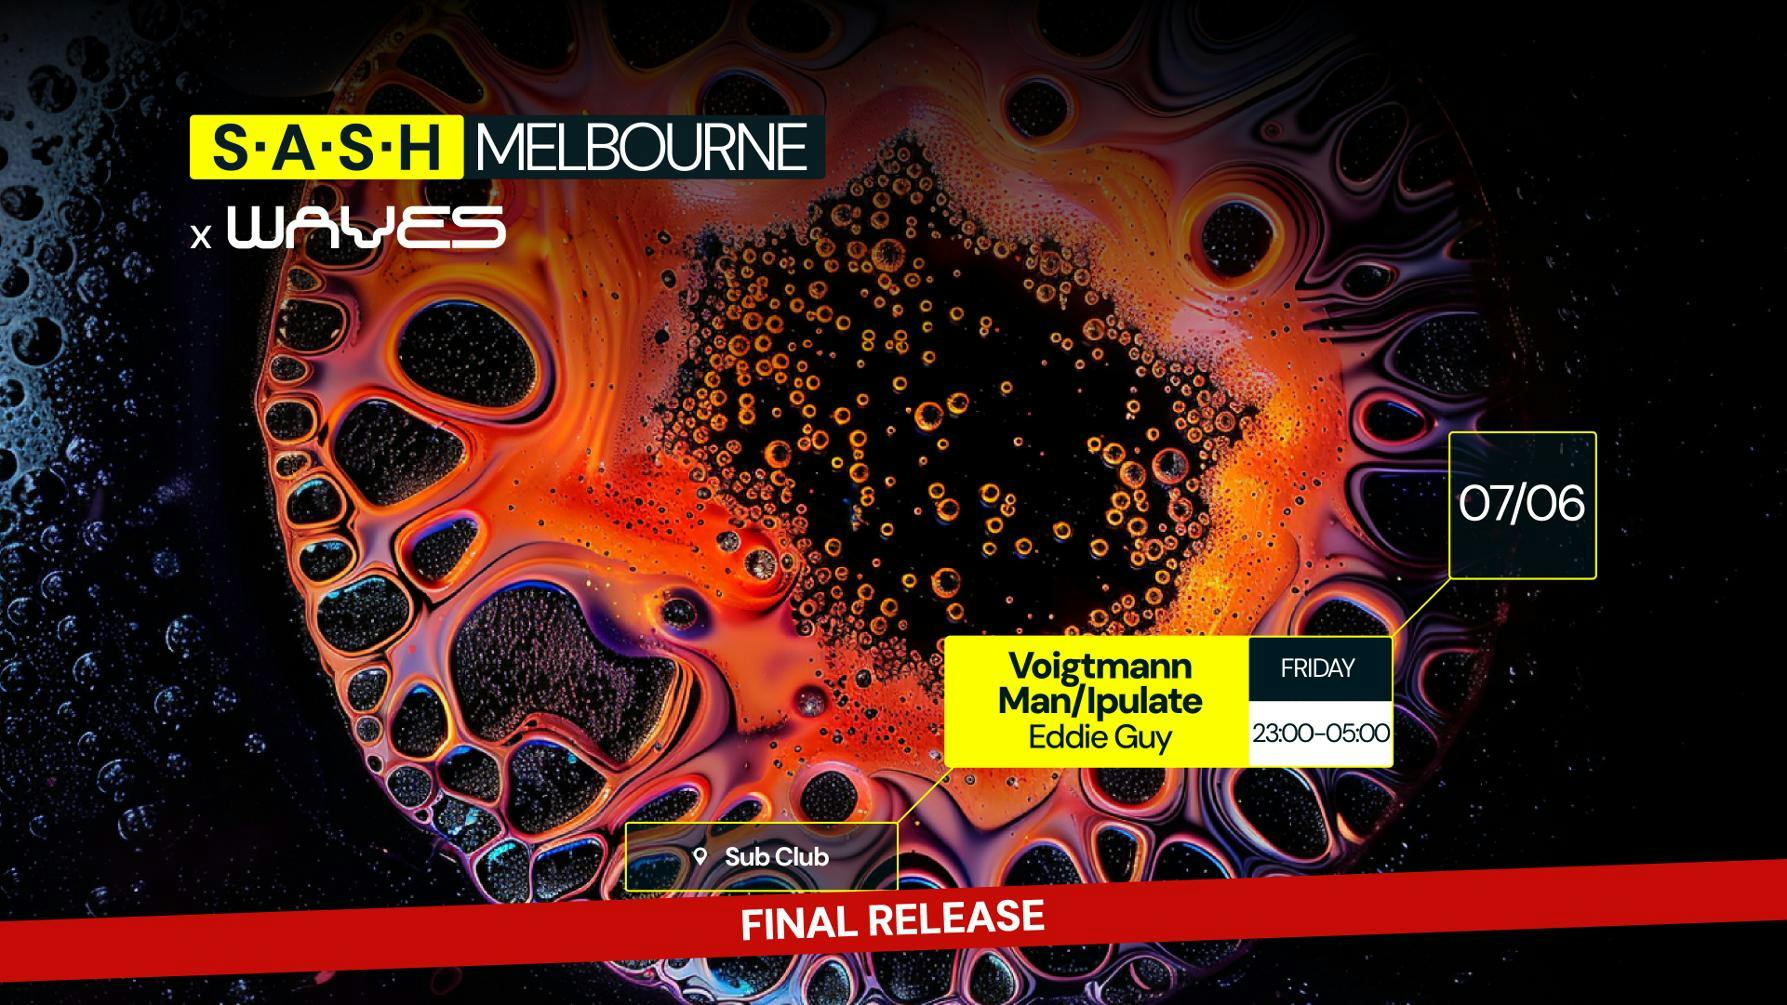 ★ S.A.S.H Melbourne & Waves ★ Voigtmann & Man/Ipulate ★ Friday June 7th ★